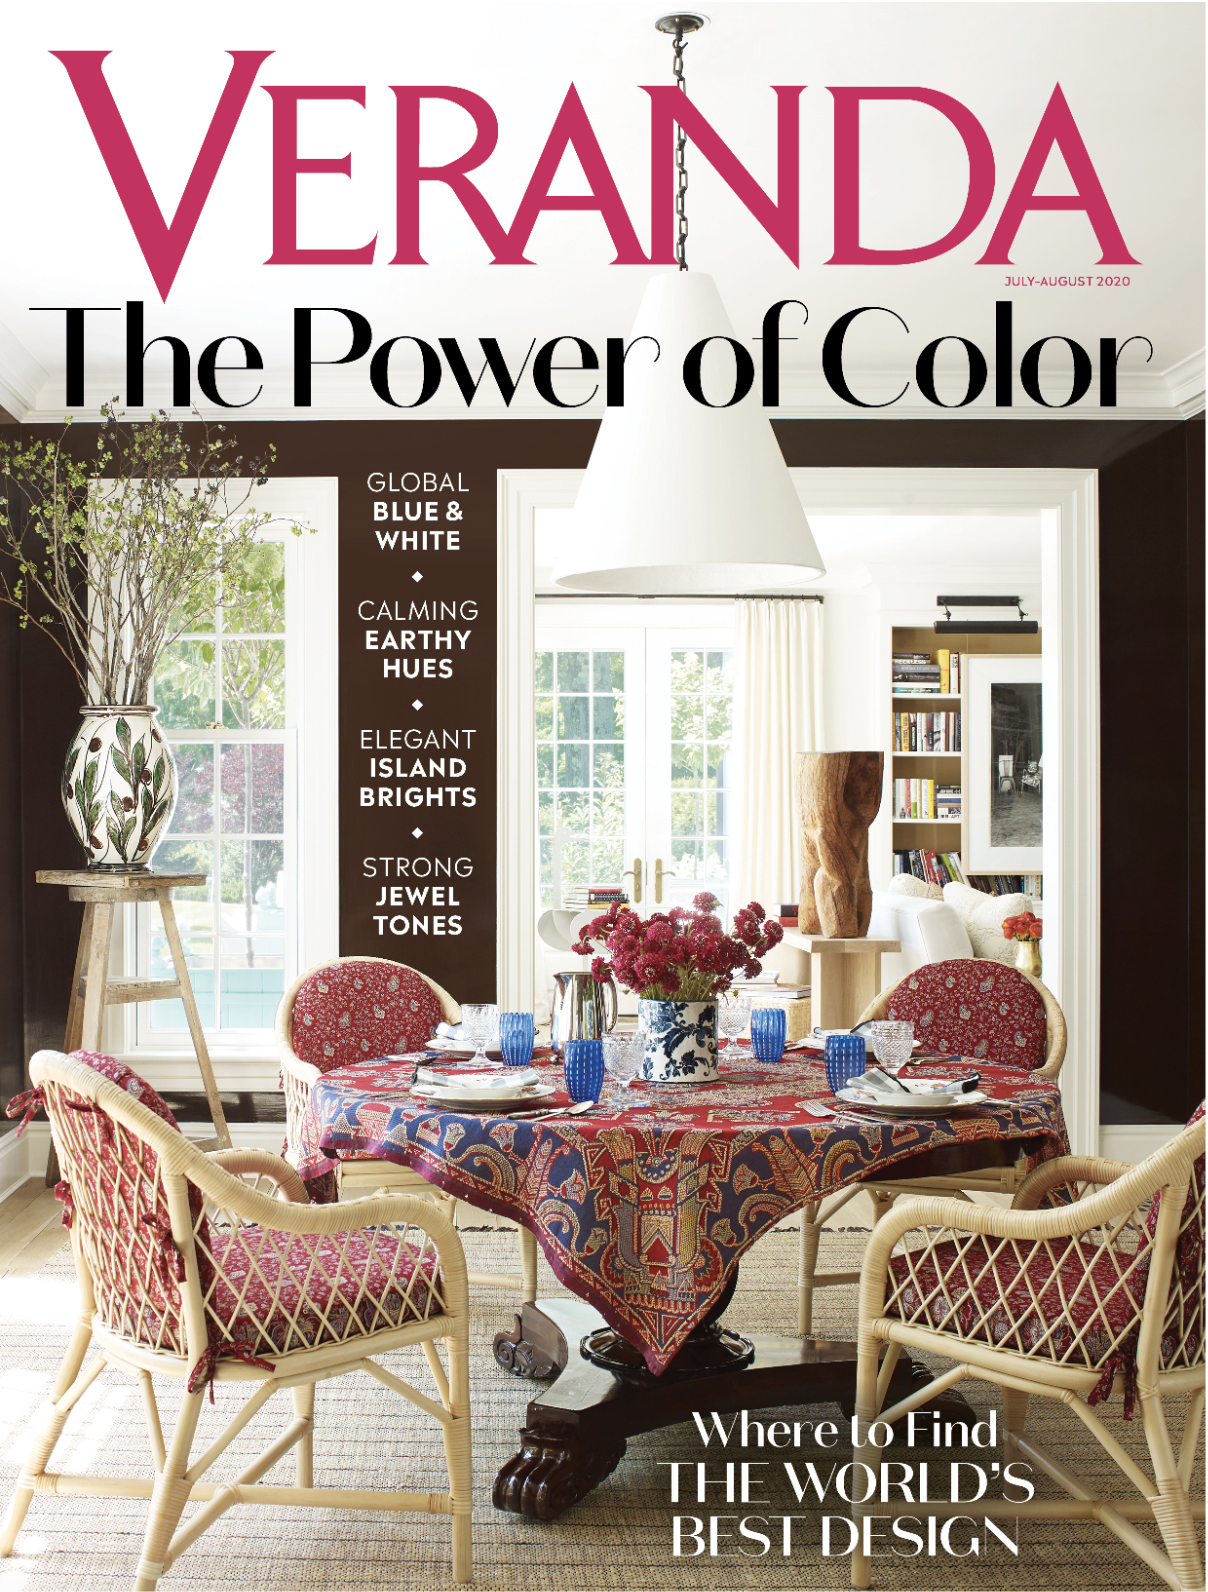 This article originally appeared in the July/August 2020 issue of VERANDA.